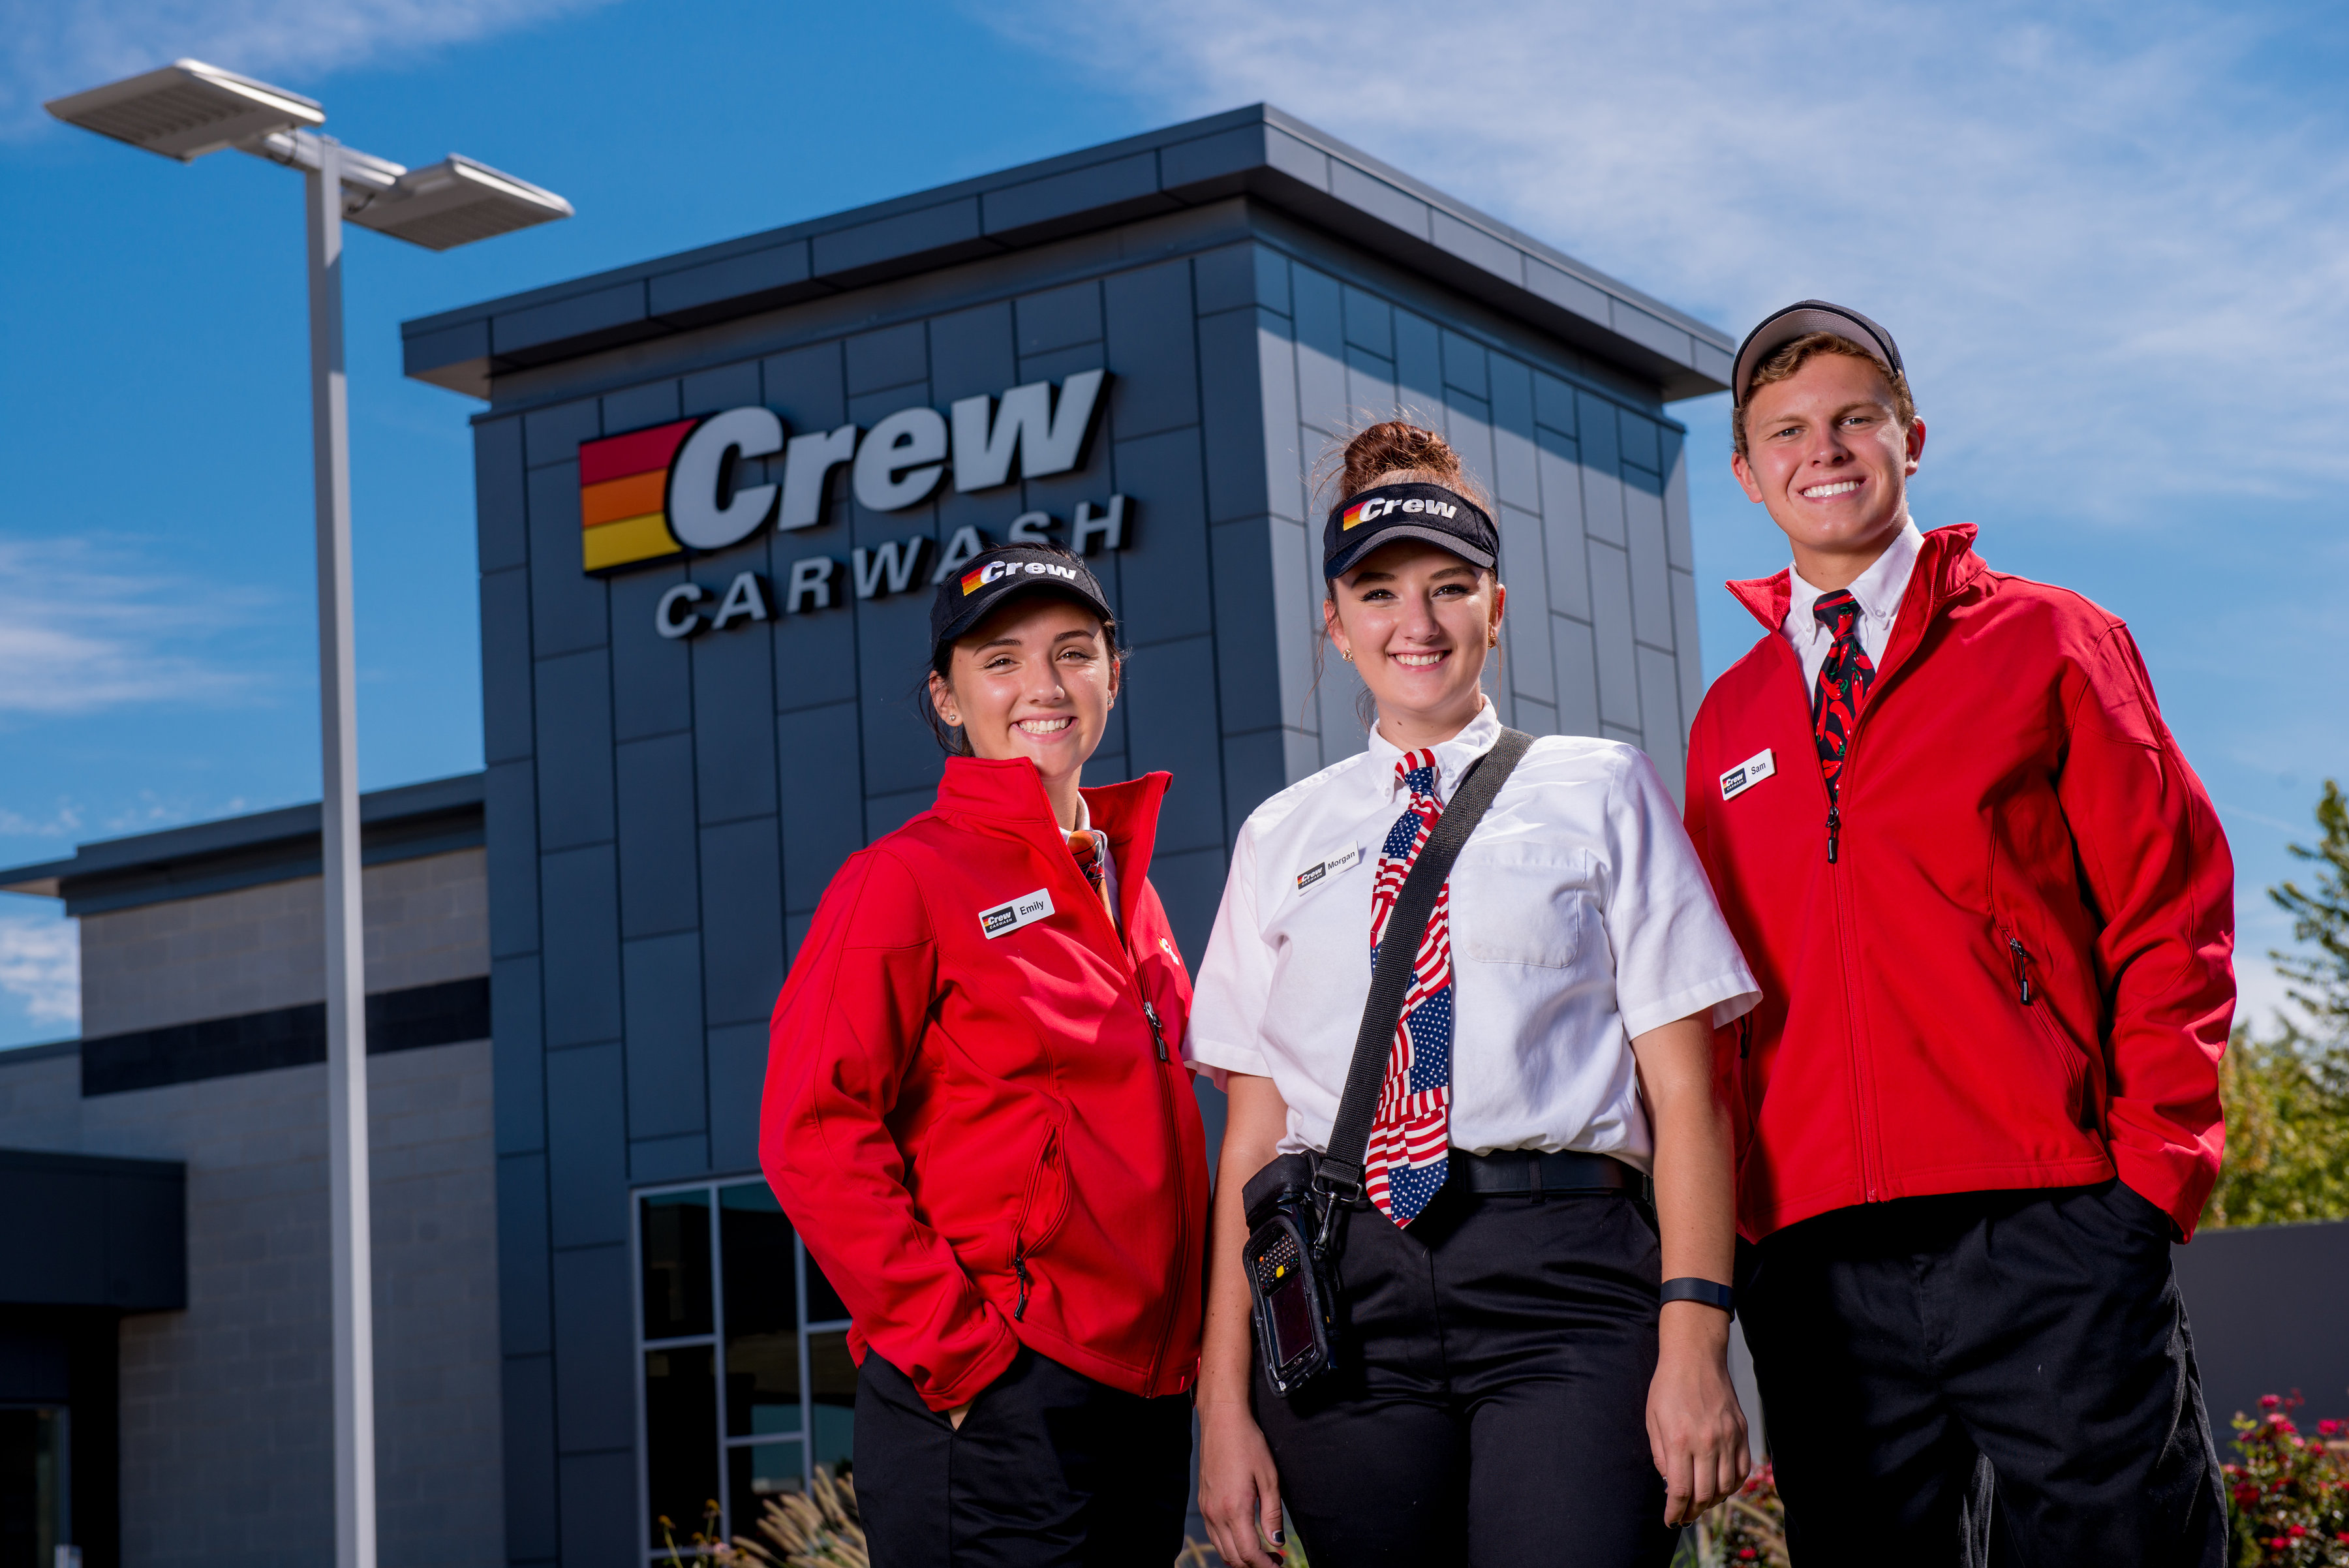 The Crew Difference | Crew Carwash Indianapolis